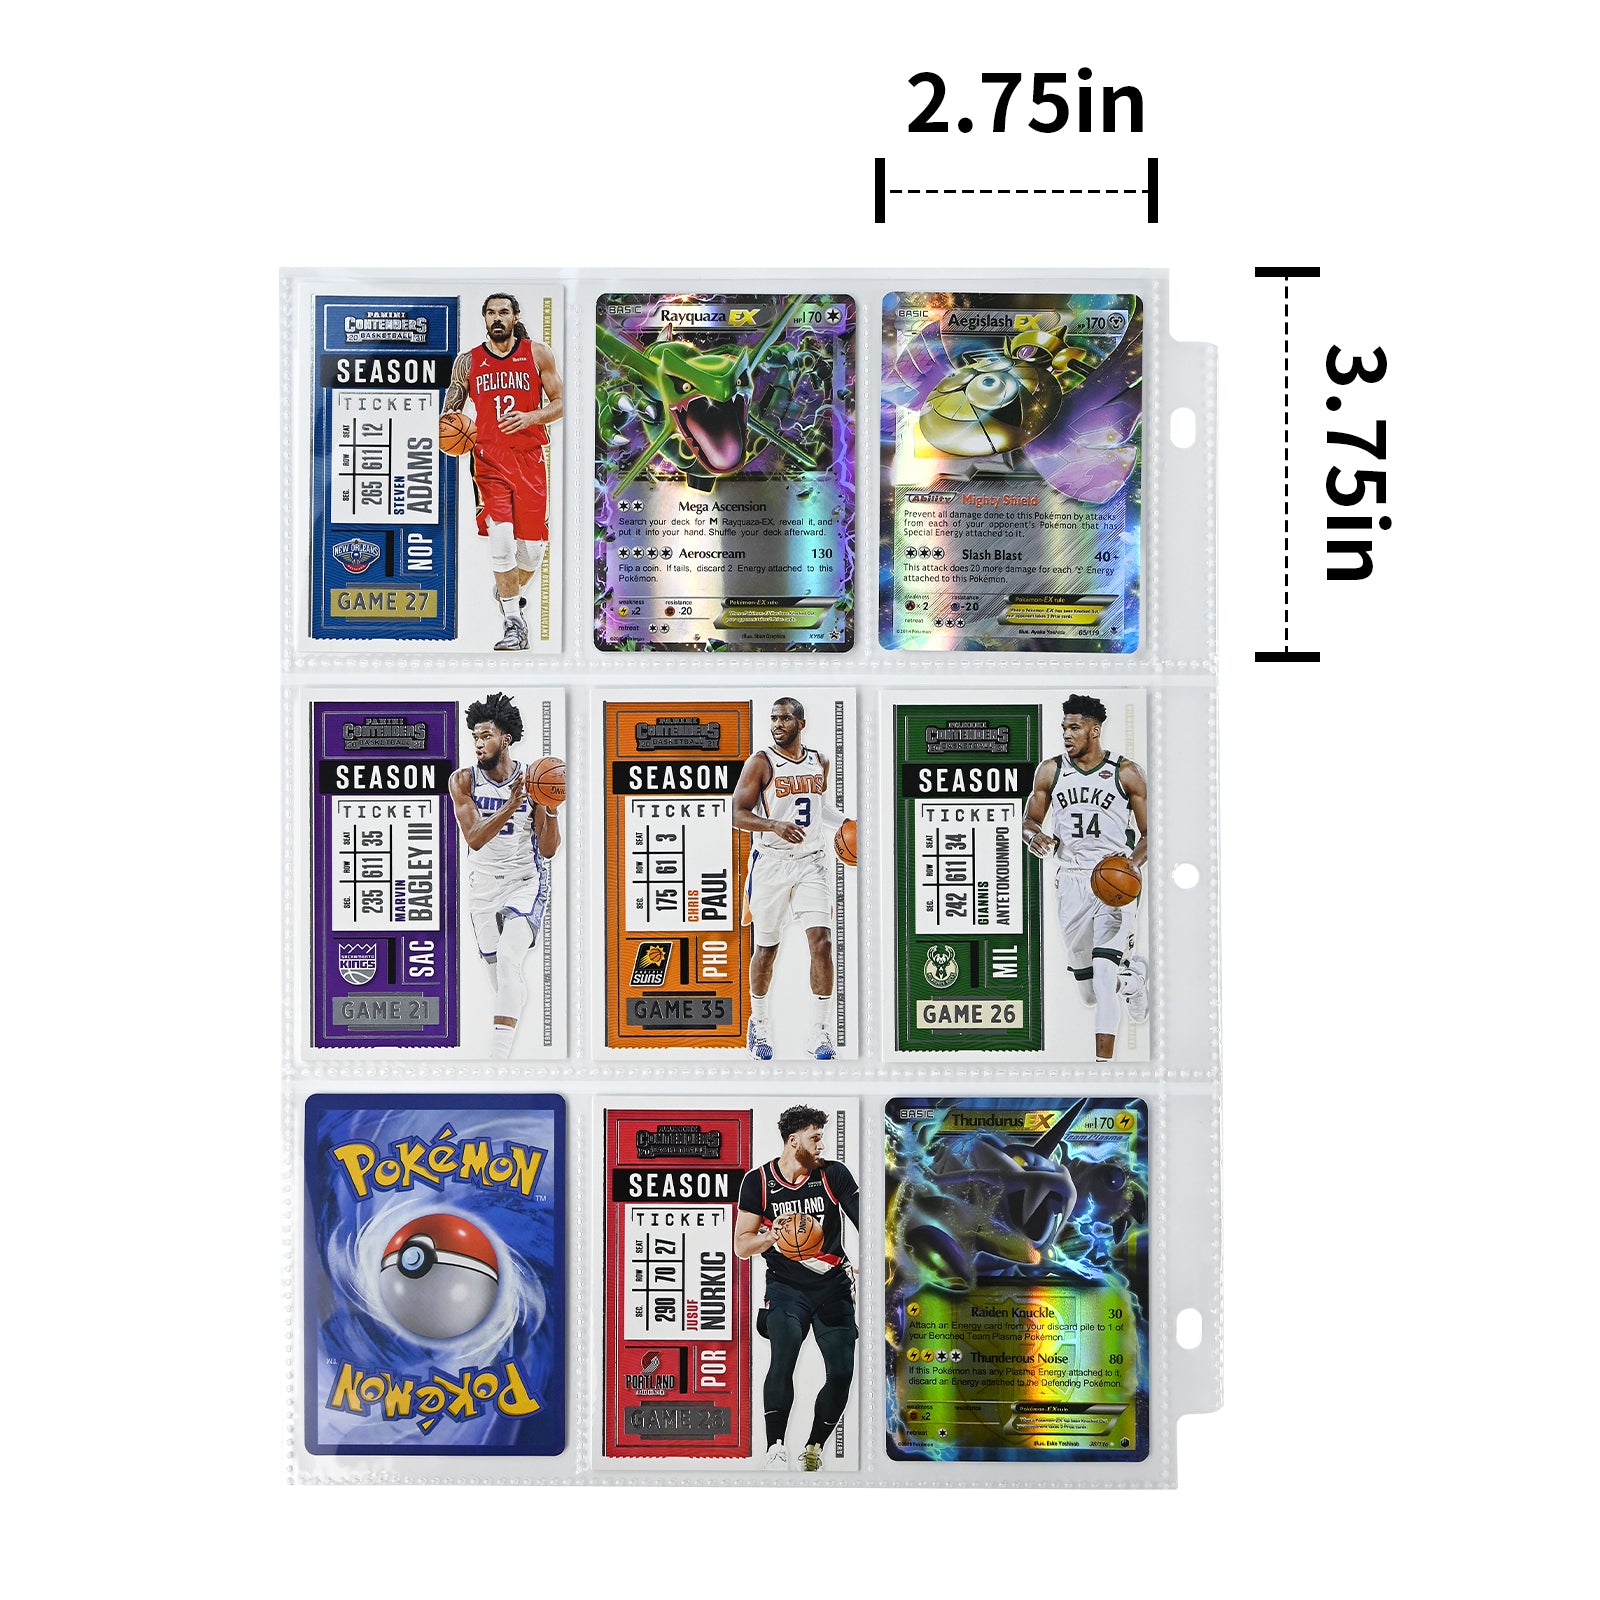 100 Pack 9 Pockets Trading Card Pages, 900 Pockets Double-Sided Trading Card  Pages Sleeves,Trading Card Sleeves for 3 Ring Binder for Pokemon Cards,  Sports Cards, Coupons, Game Cards.